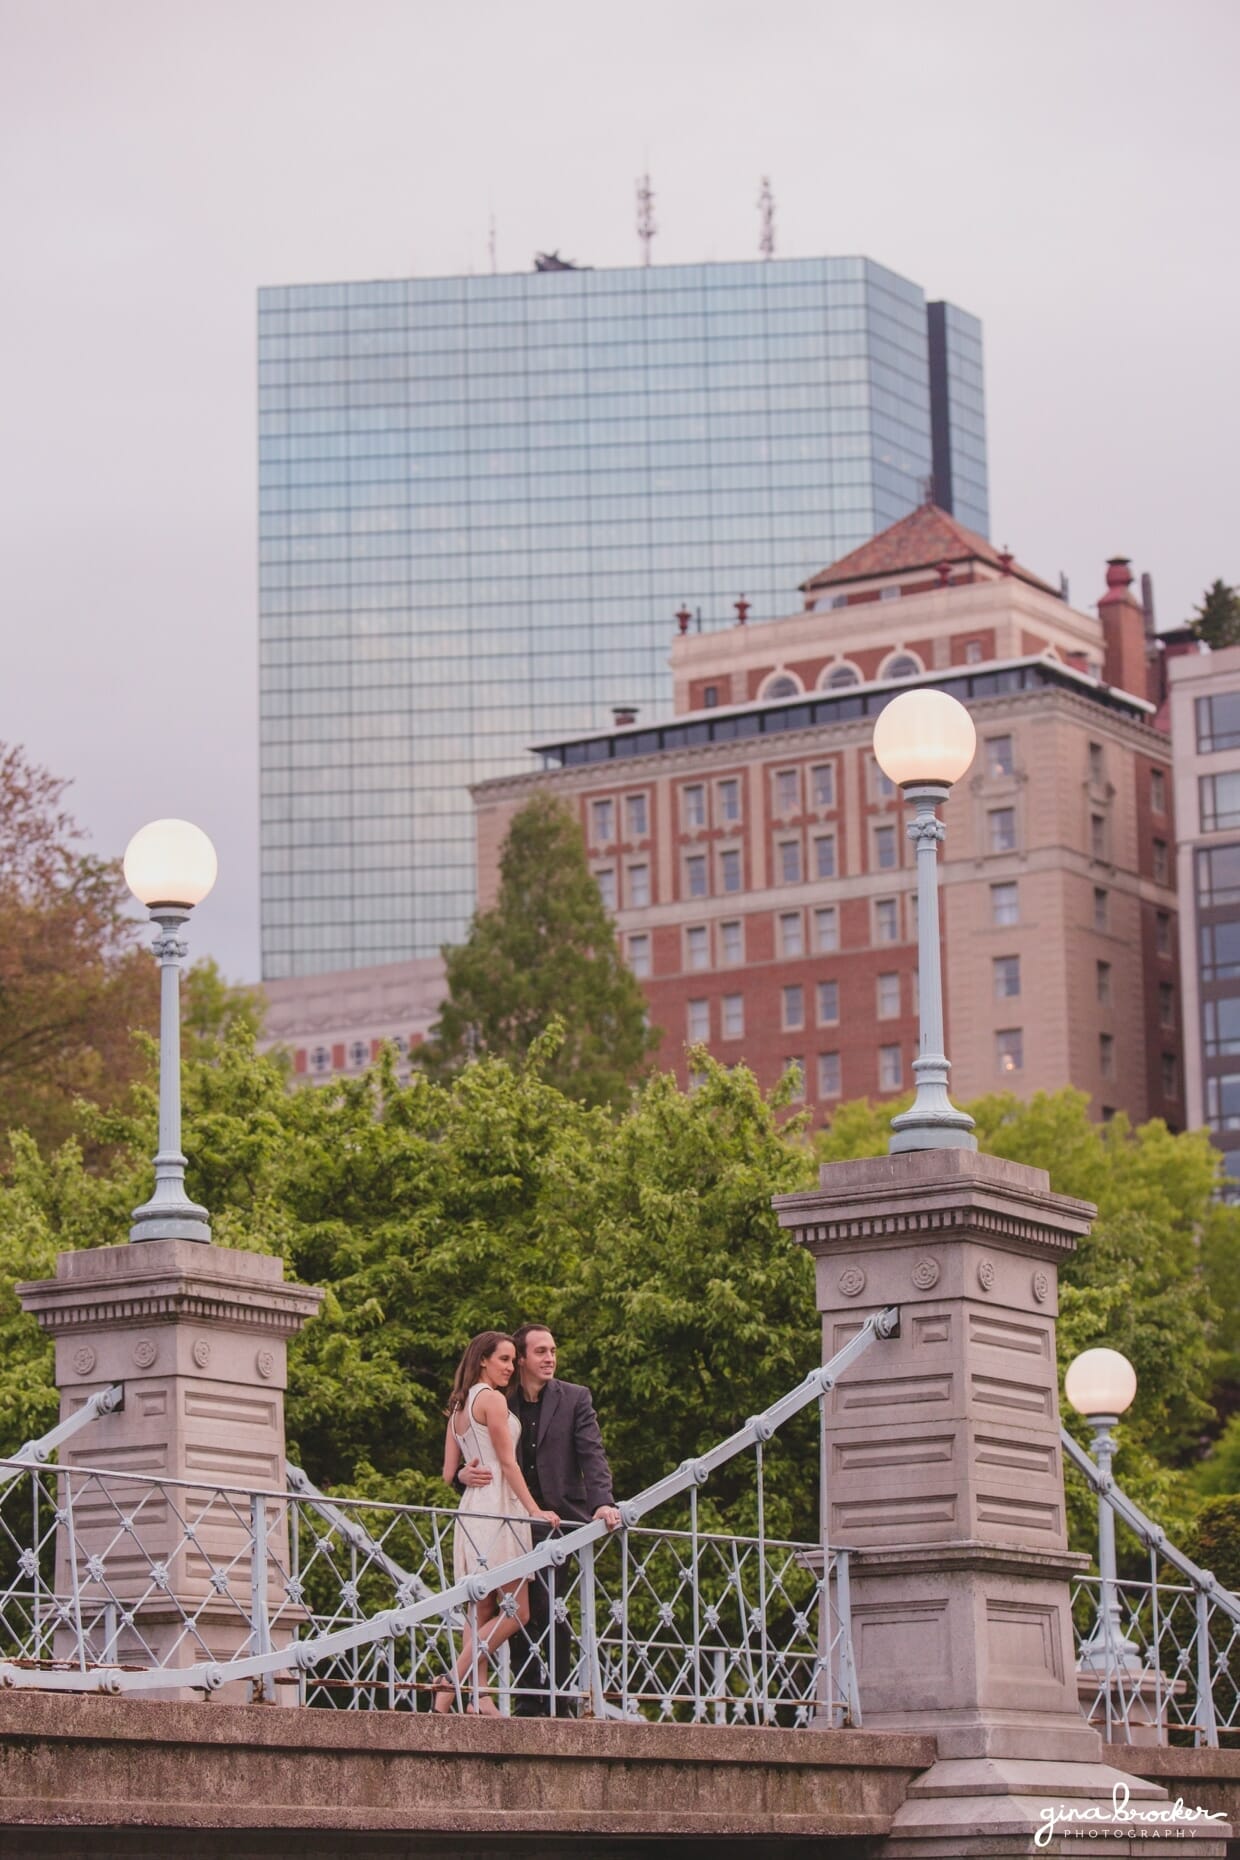 A beautiful portrait of a couple standing on a bridge in the Boston Public Gardens with the Boston skyline in the background